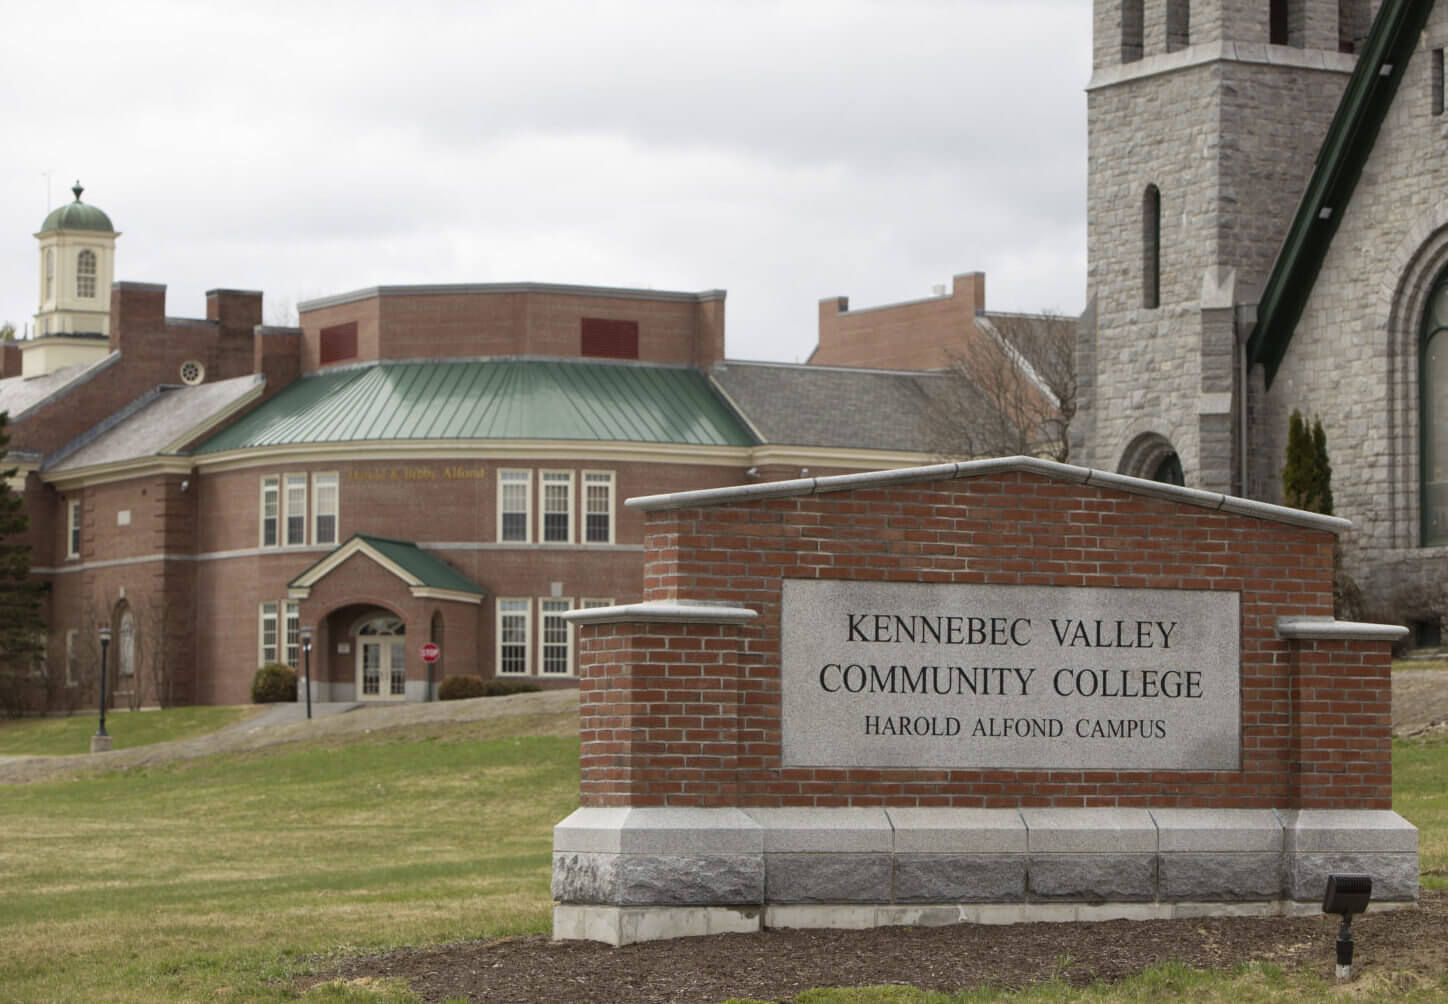 Kennebec Valley Community College buildings